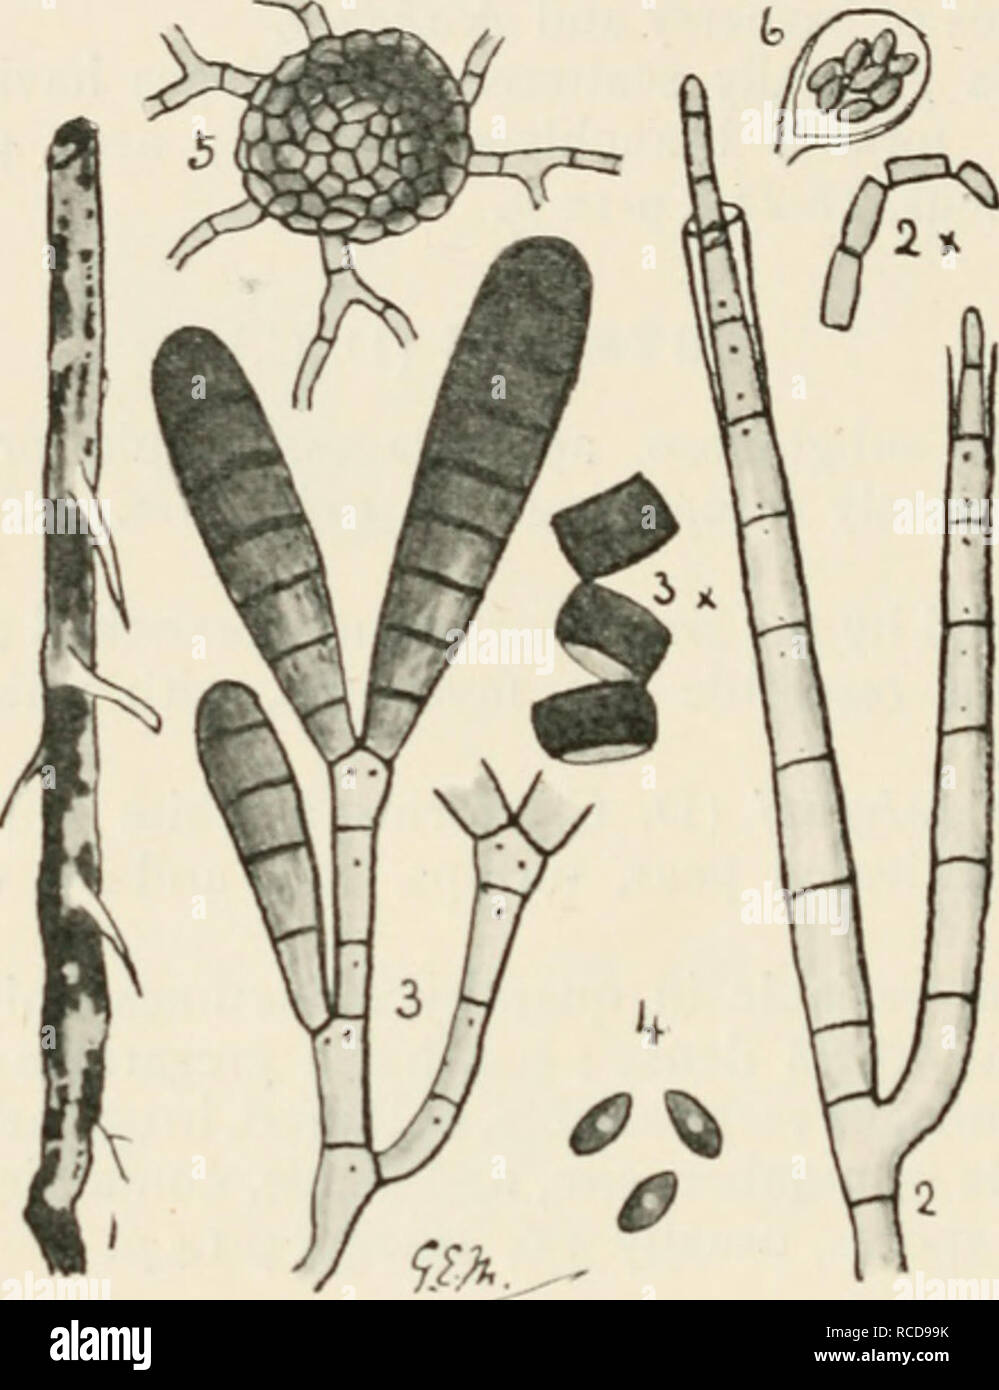 . Diseases of cultivated plants and trees. Plant diseases; Plants -- Wounds and injuries; Plants, Protection of; Trees -- Diseases and pests. [6o DISEASES OF CULTIVATED PLANTS Black root rot {Thielavia basicola, Zopf) was first met with in England on the roots of peas, and called Torula basicola by Berkeley and Broome. Four kinds of fruit have been described, the highest of which is an ascigerous form discovered in Germany by Zopf, on the root of a Senecio. Some doubt was at one time entertained as to whether the. l-&quot;i(j. .— Thielavia basicola. i, diseased pea root; 2, portion of first  Stock Photo